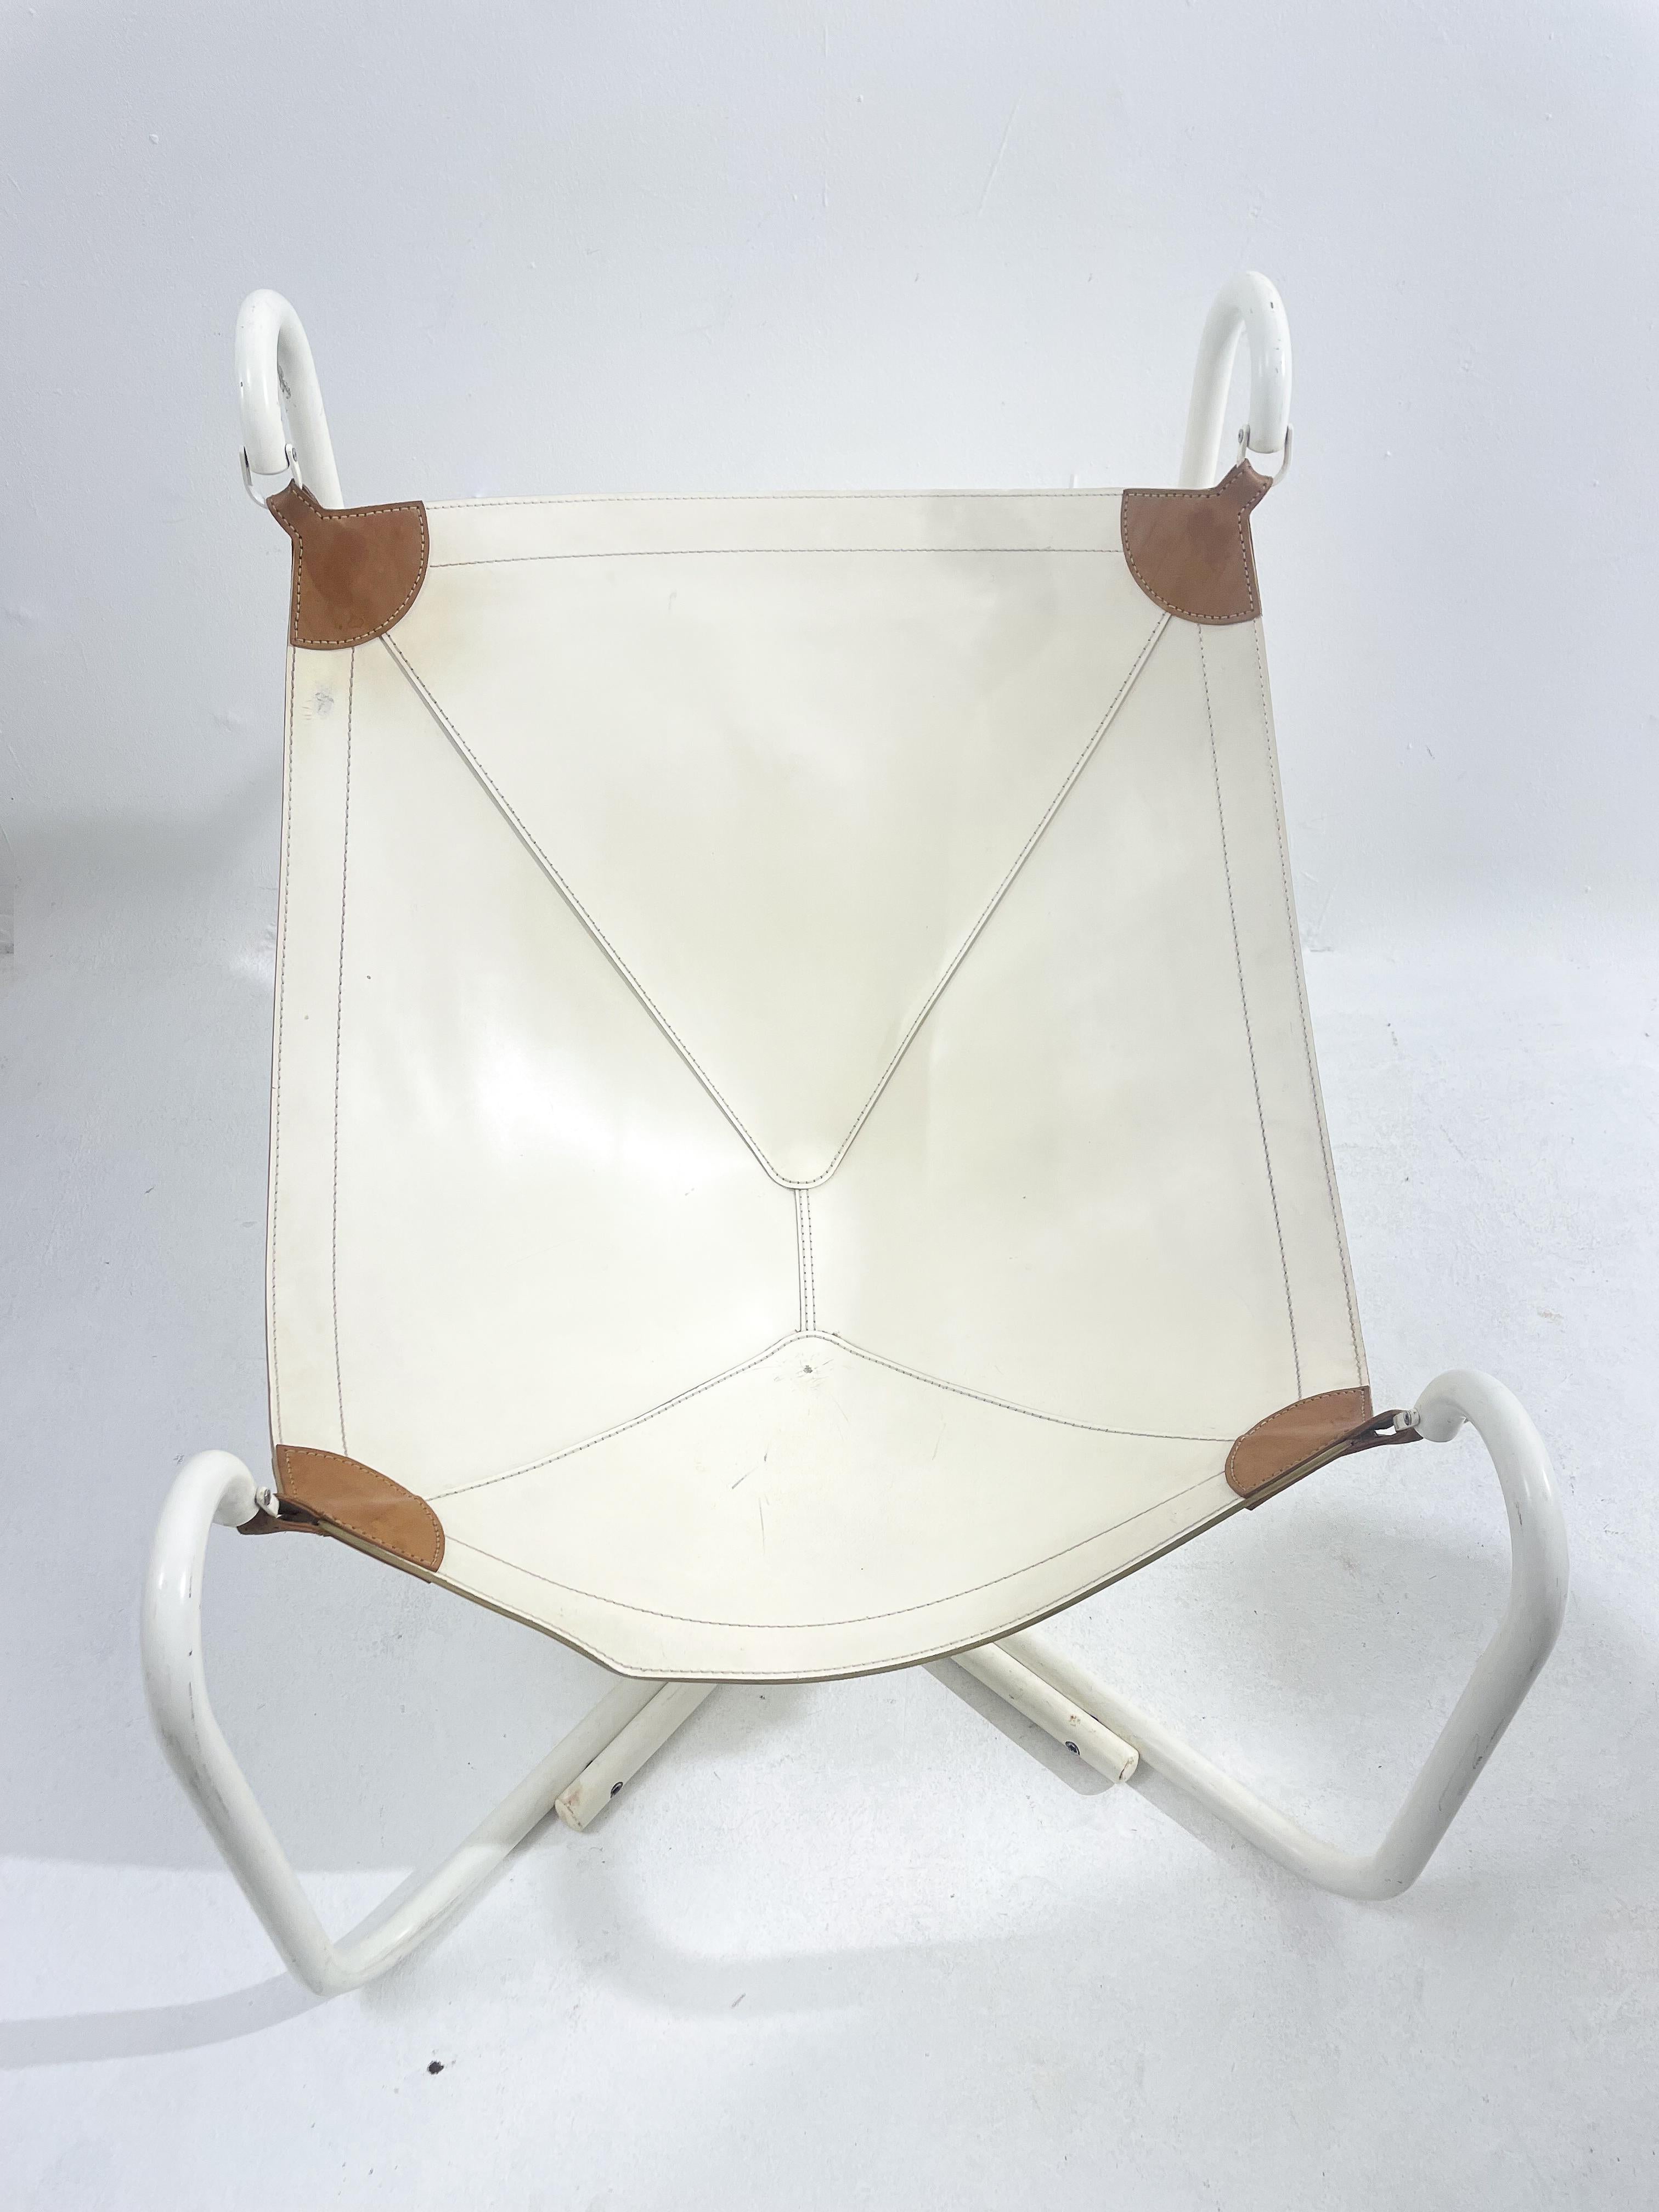 Mid-20th Century Baffo Lounge Chair by Gianni Pareschi and Ezio Didone for Busnelli, Italy, 1969